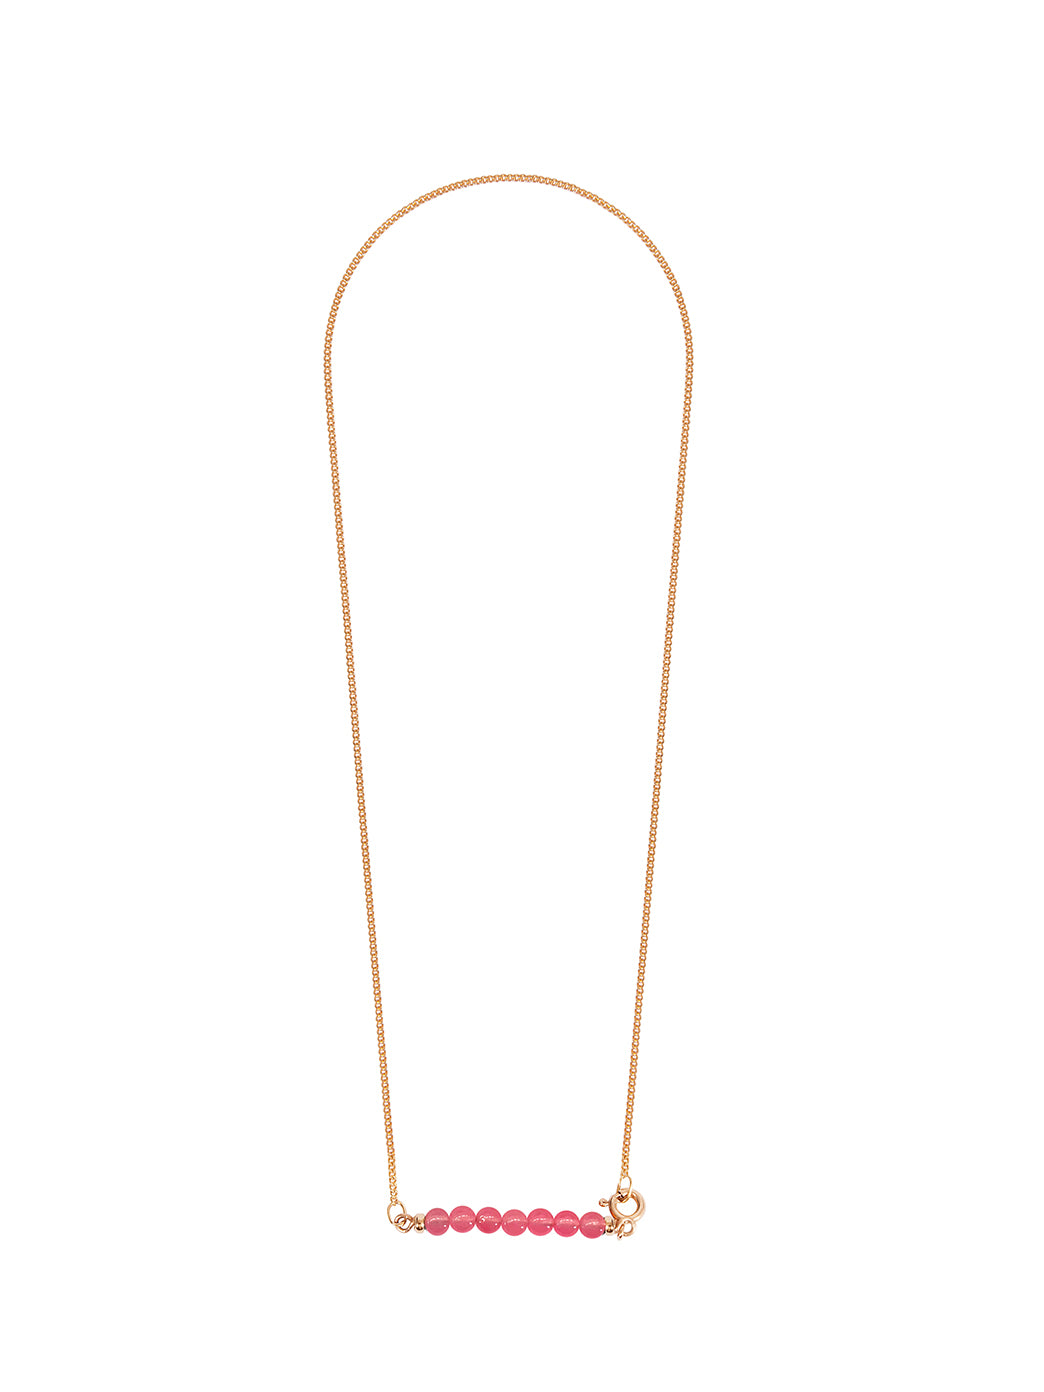 Fiorina Jewellery Gold Friendship Necklace Lolly Pink